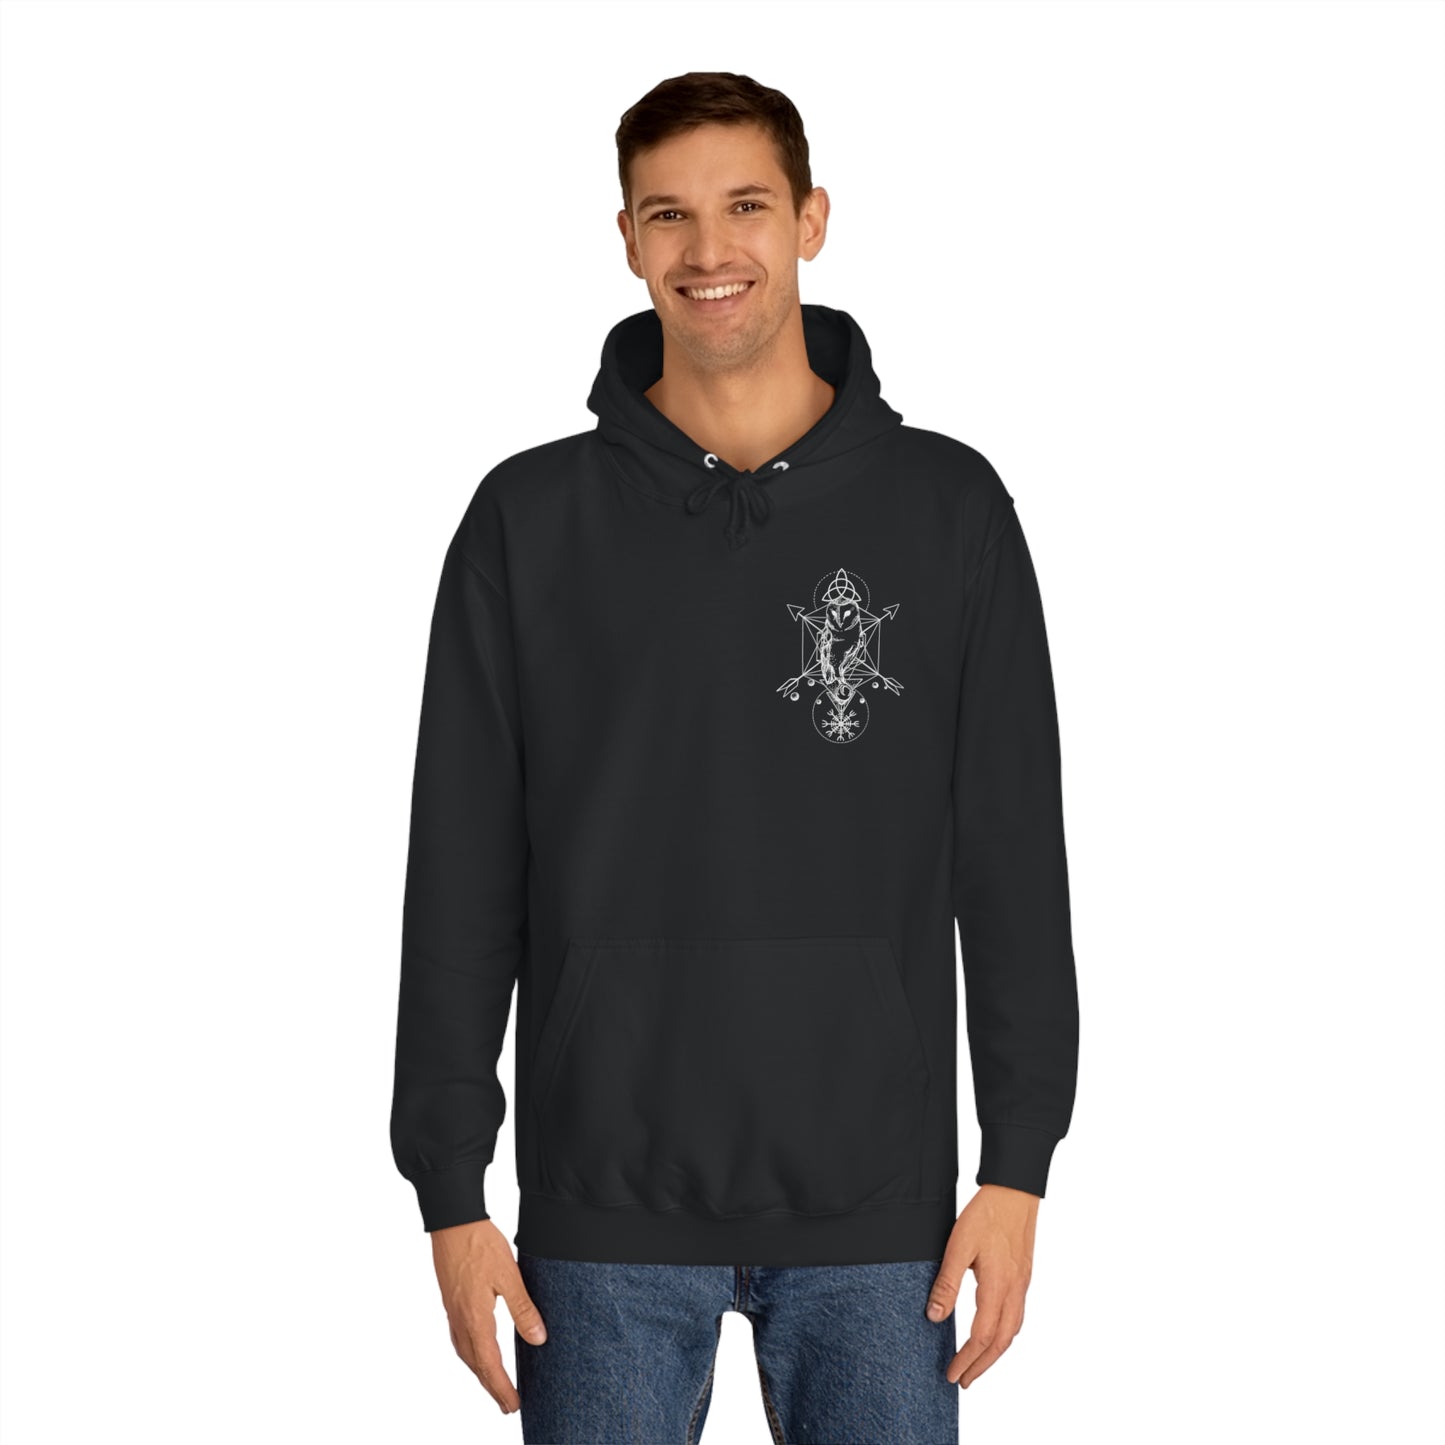 Witches Supporting Other Bitches Hoodie